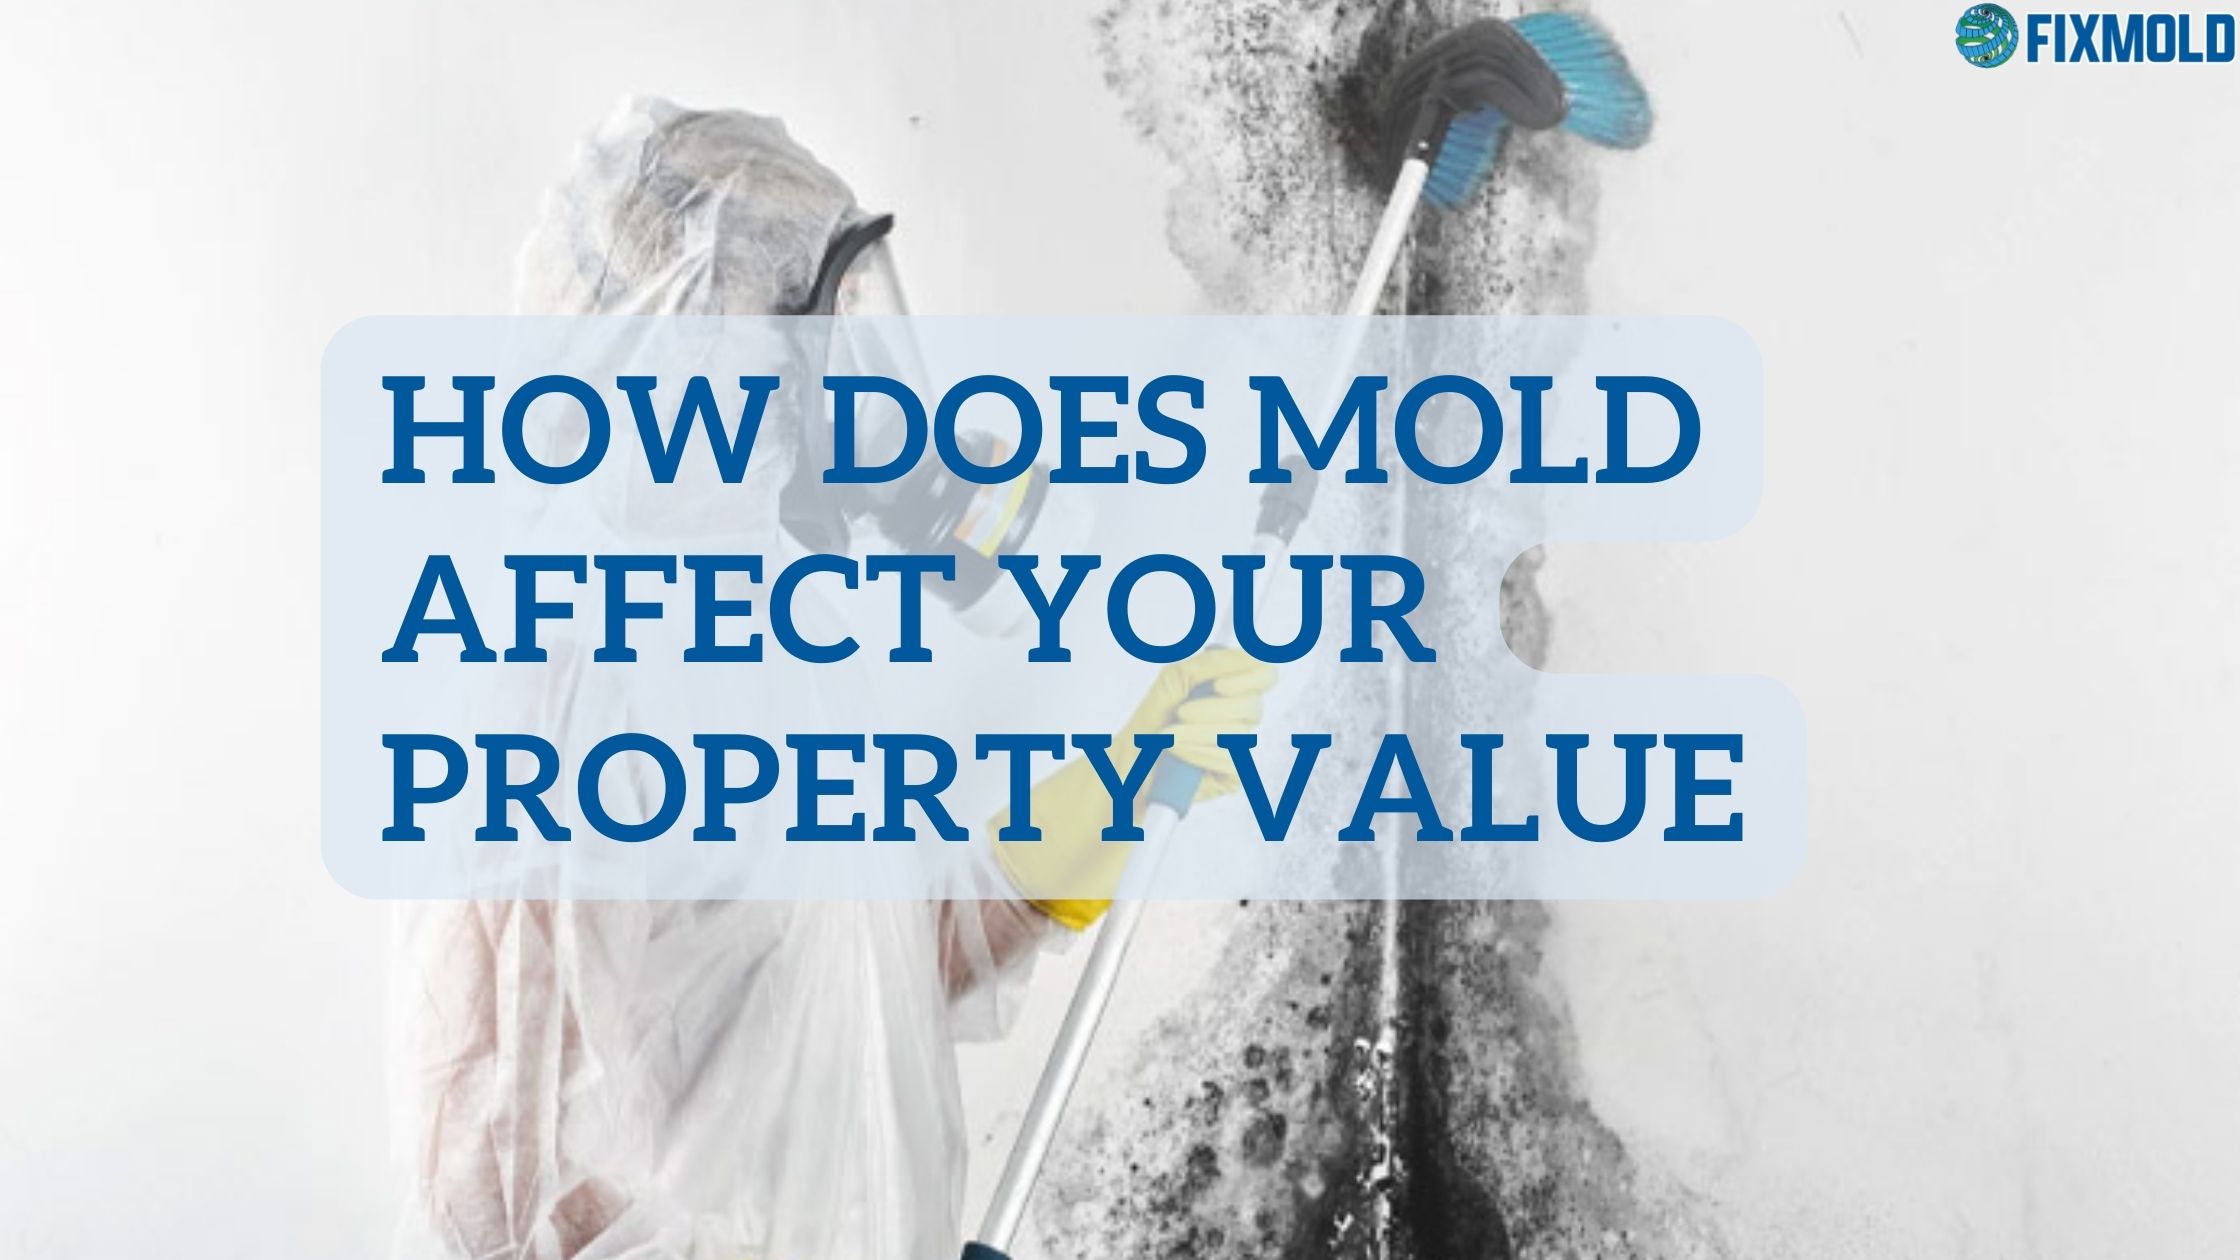 How does mold affect your property value